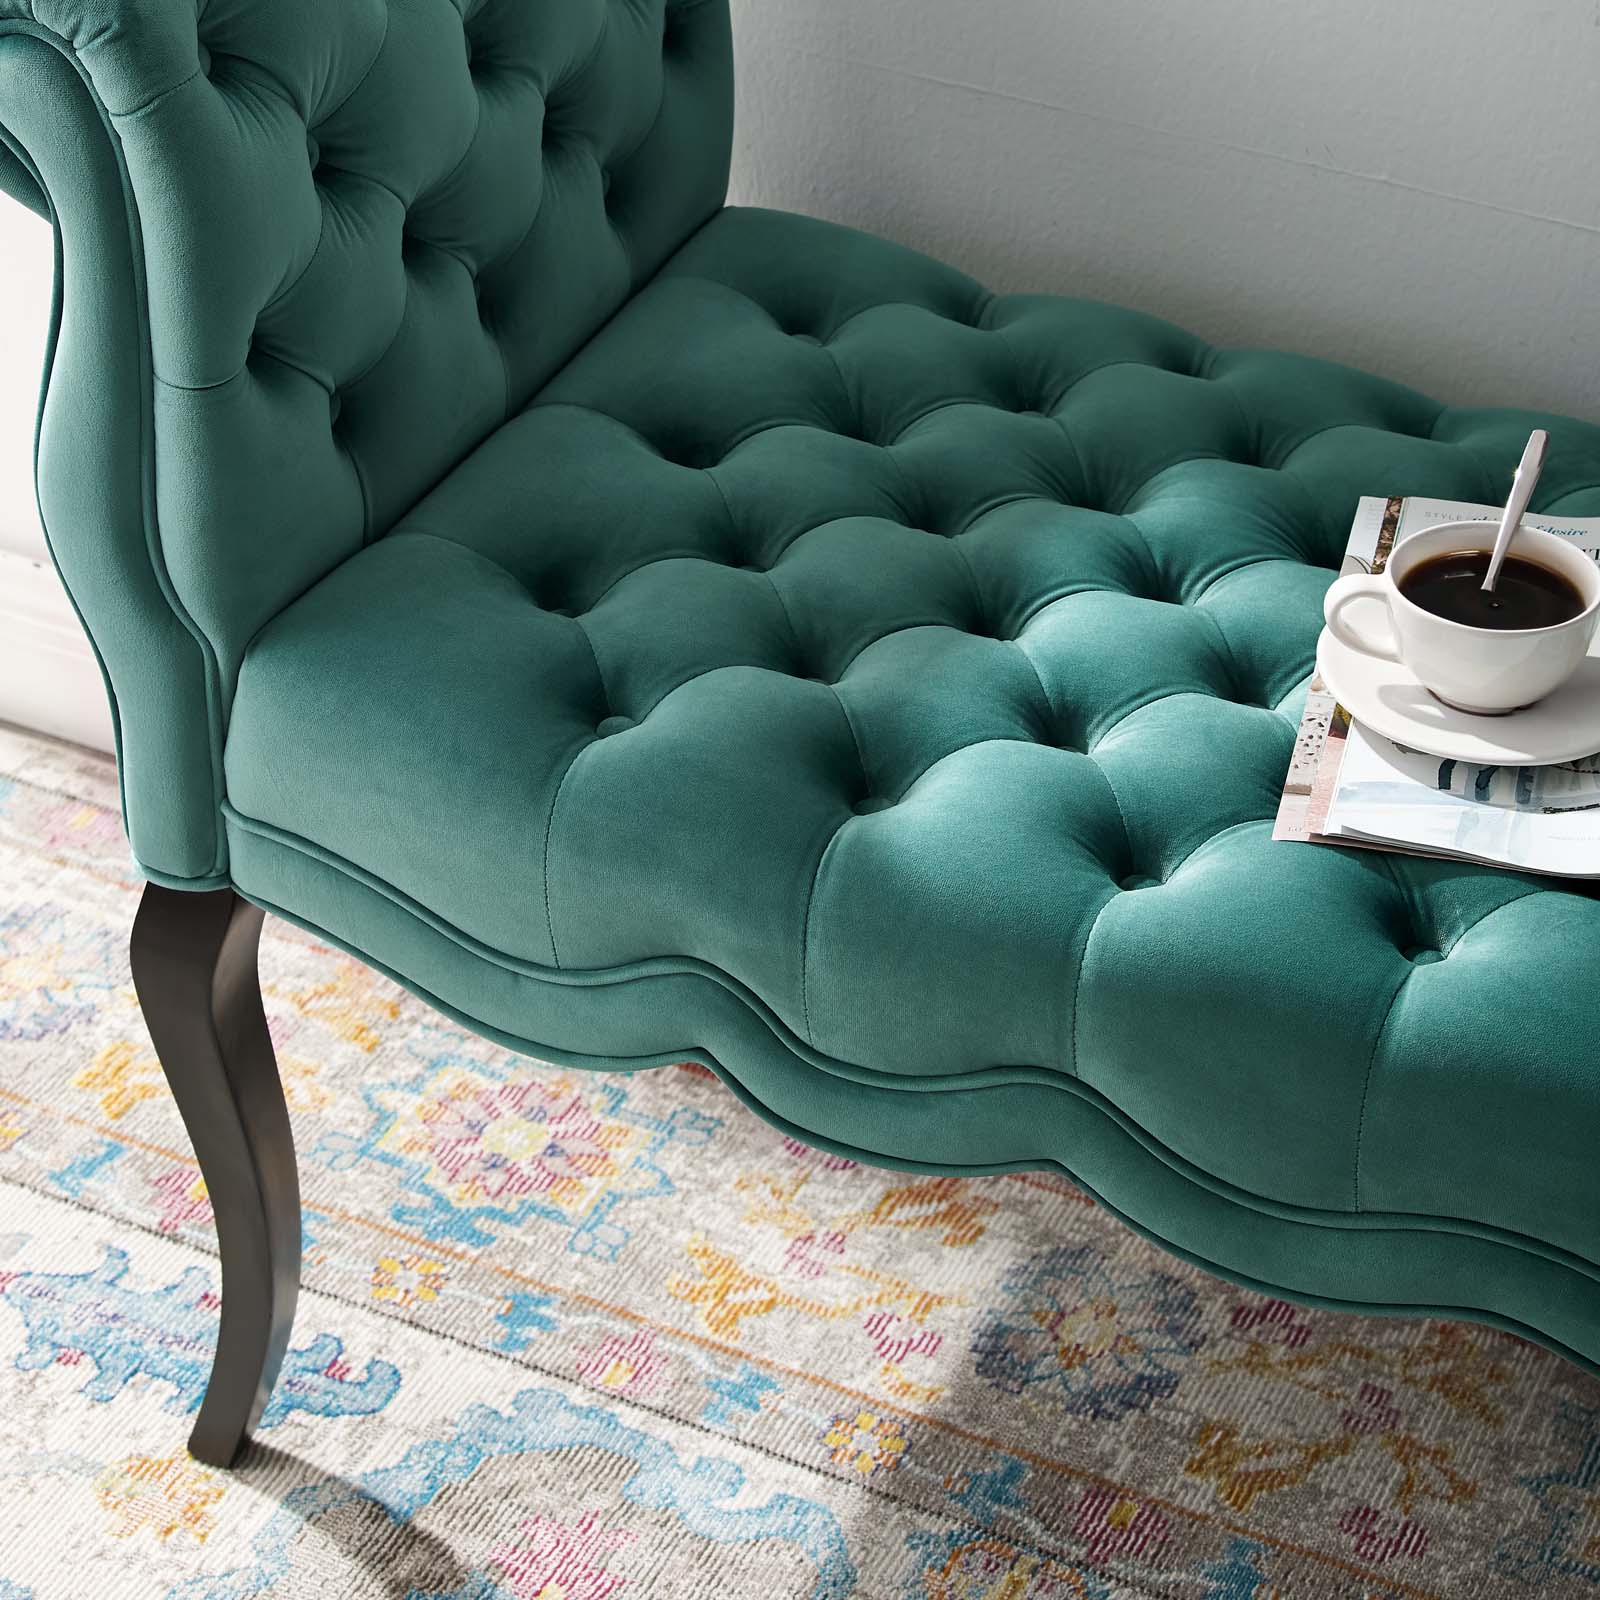 Modway Benches - Adelia Chesterfield Style Button Tufted Performance Velvet Bench Teal